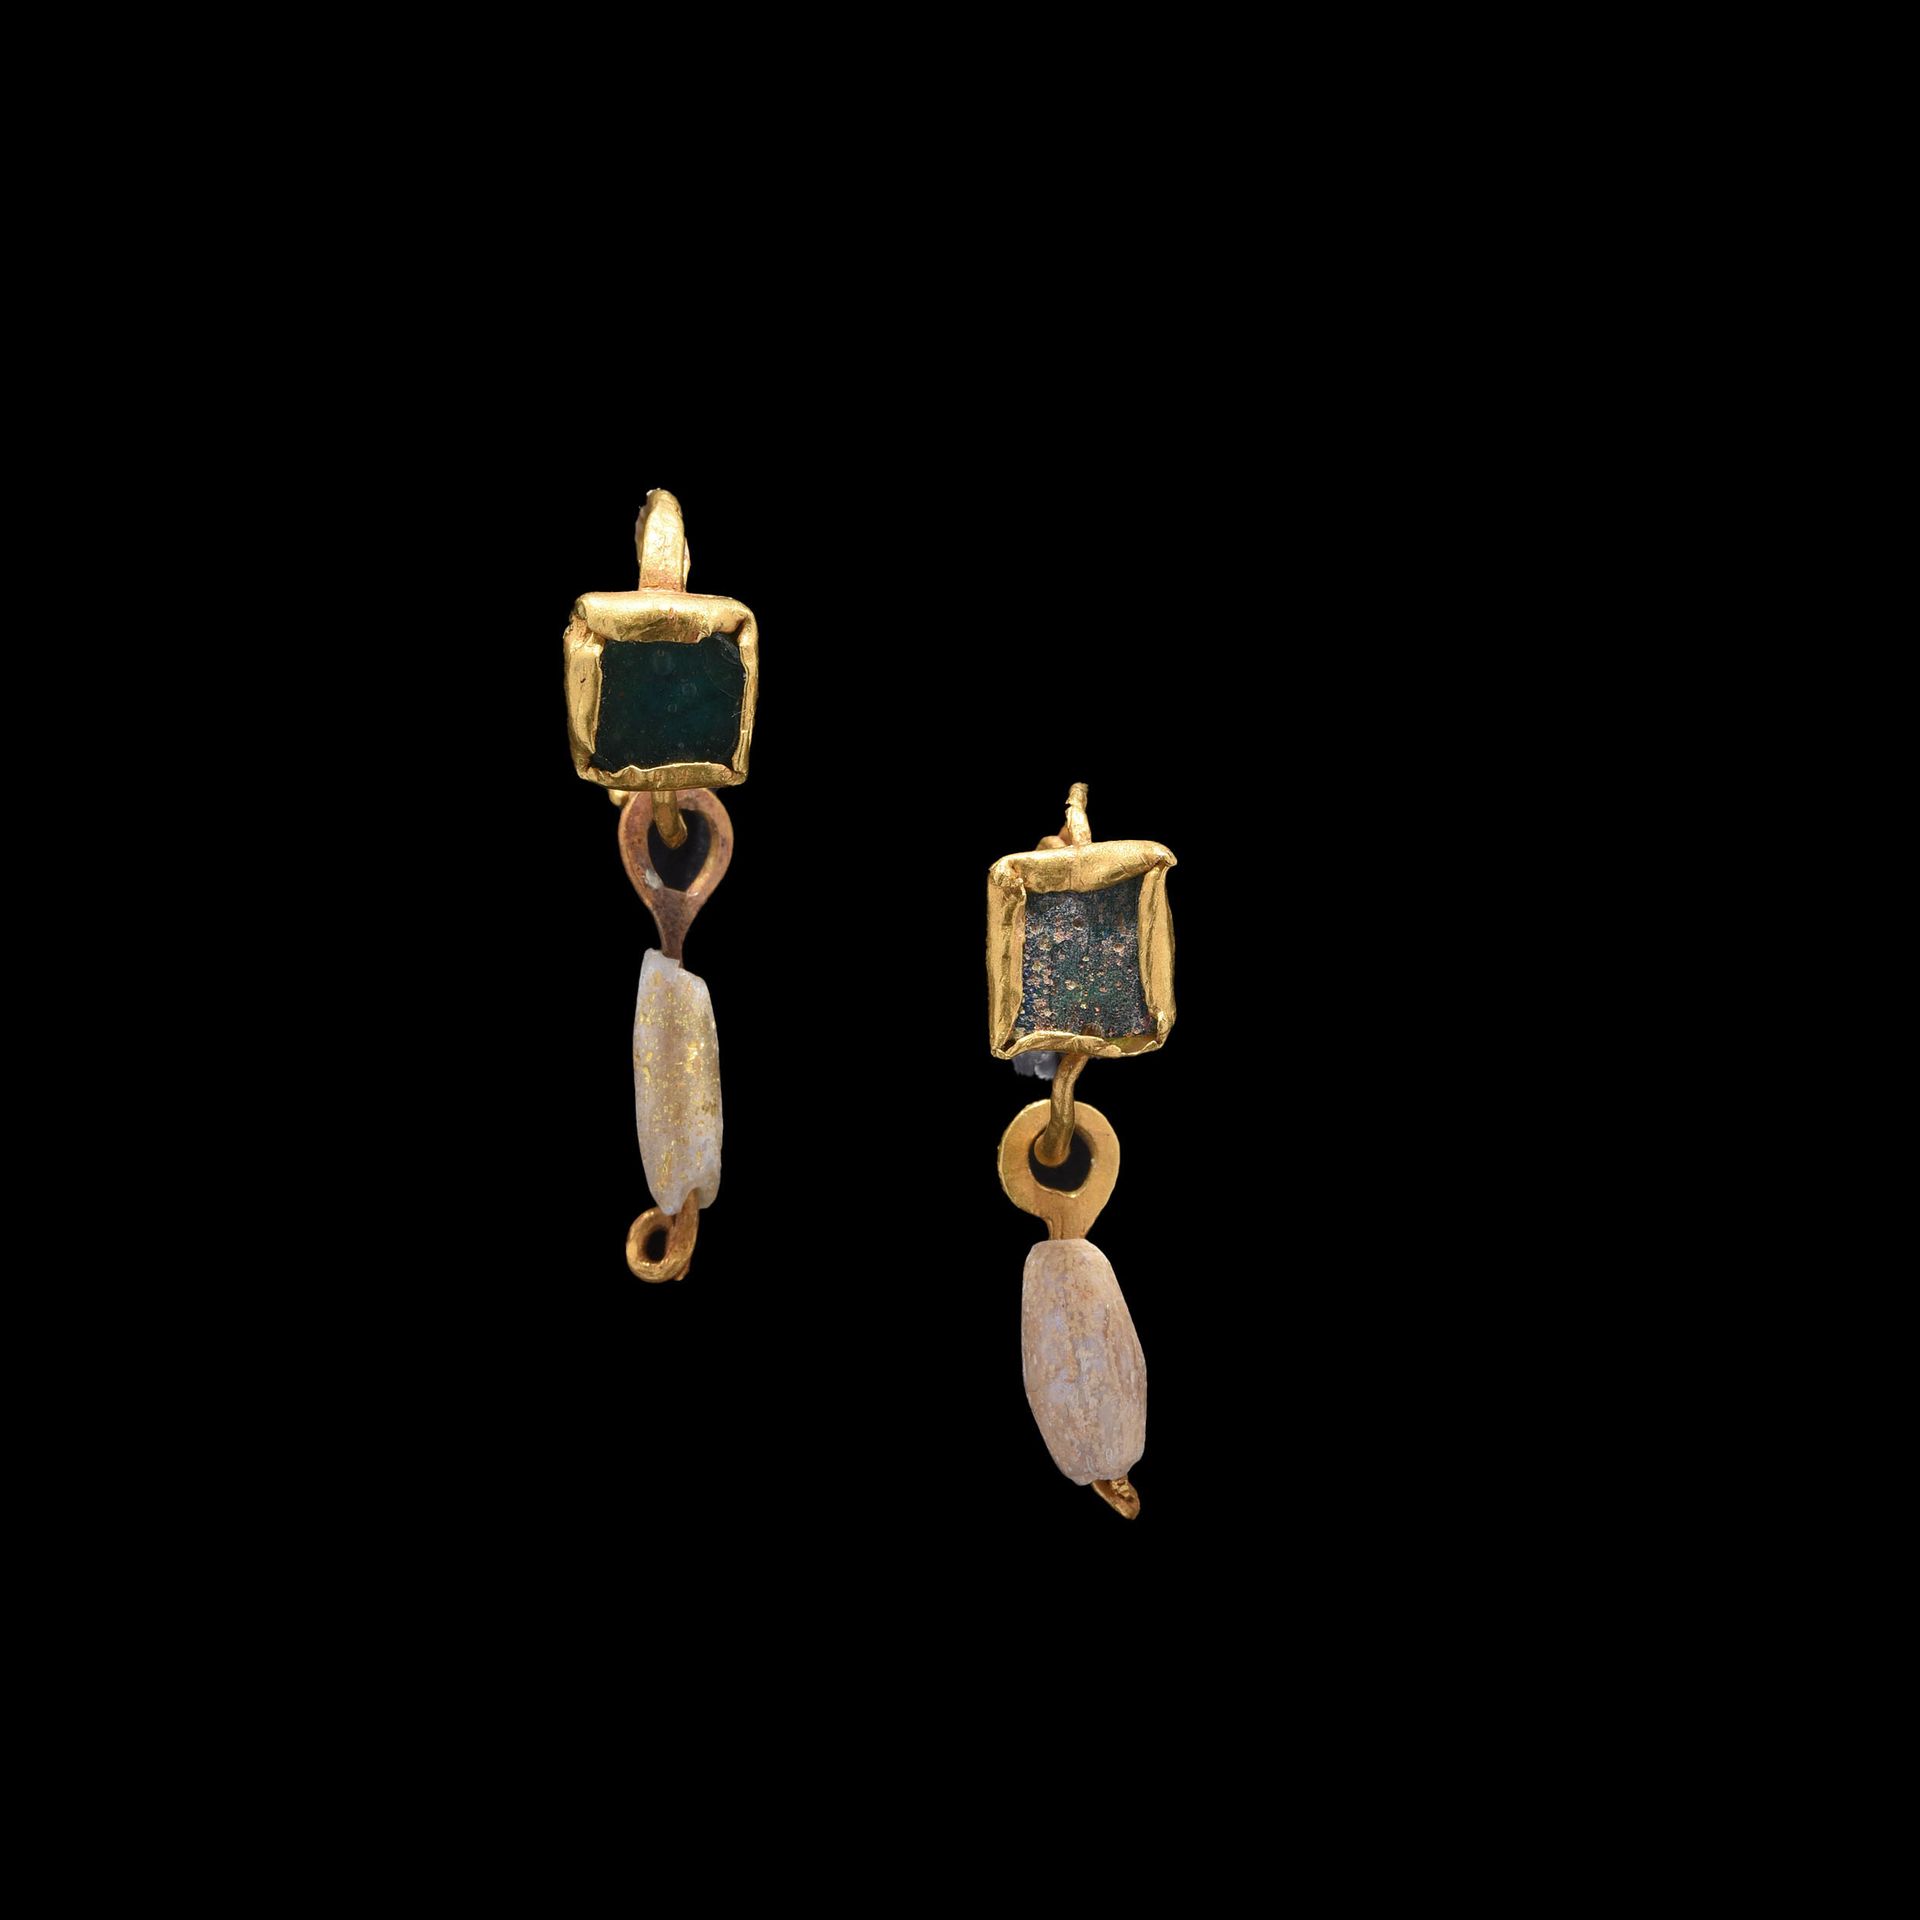 Null PAIR OF EARRINGS

Roman art, 1st-2nd century.

Gold set with green glass an&hellip;